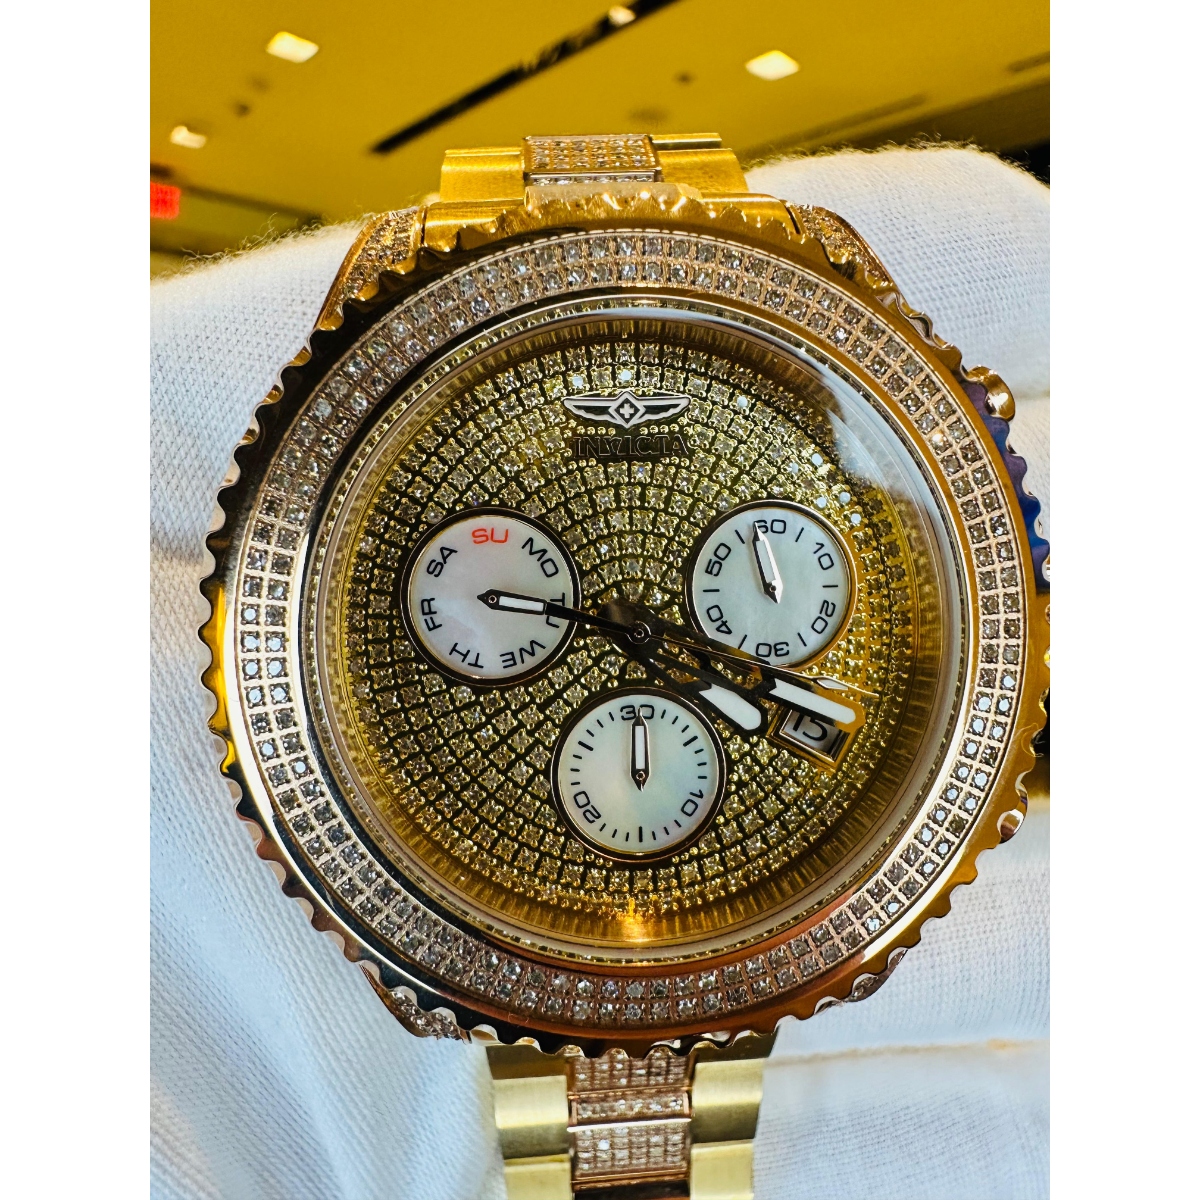 3RD ANNIVERSARY RIM WATCH ICED OUT VVS-EDITION